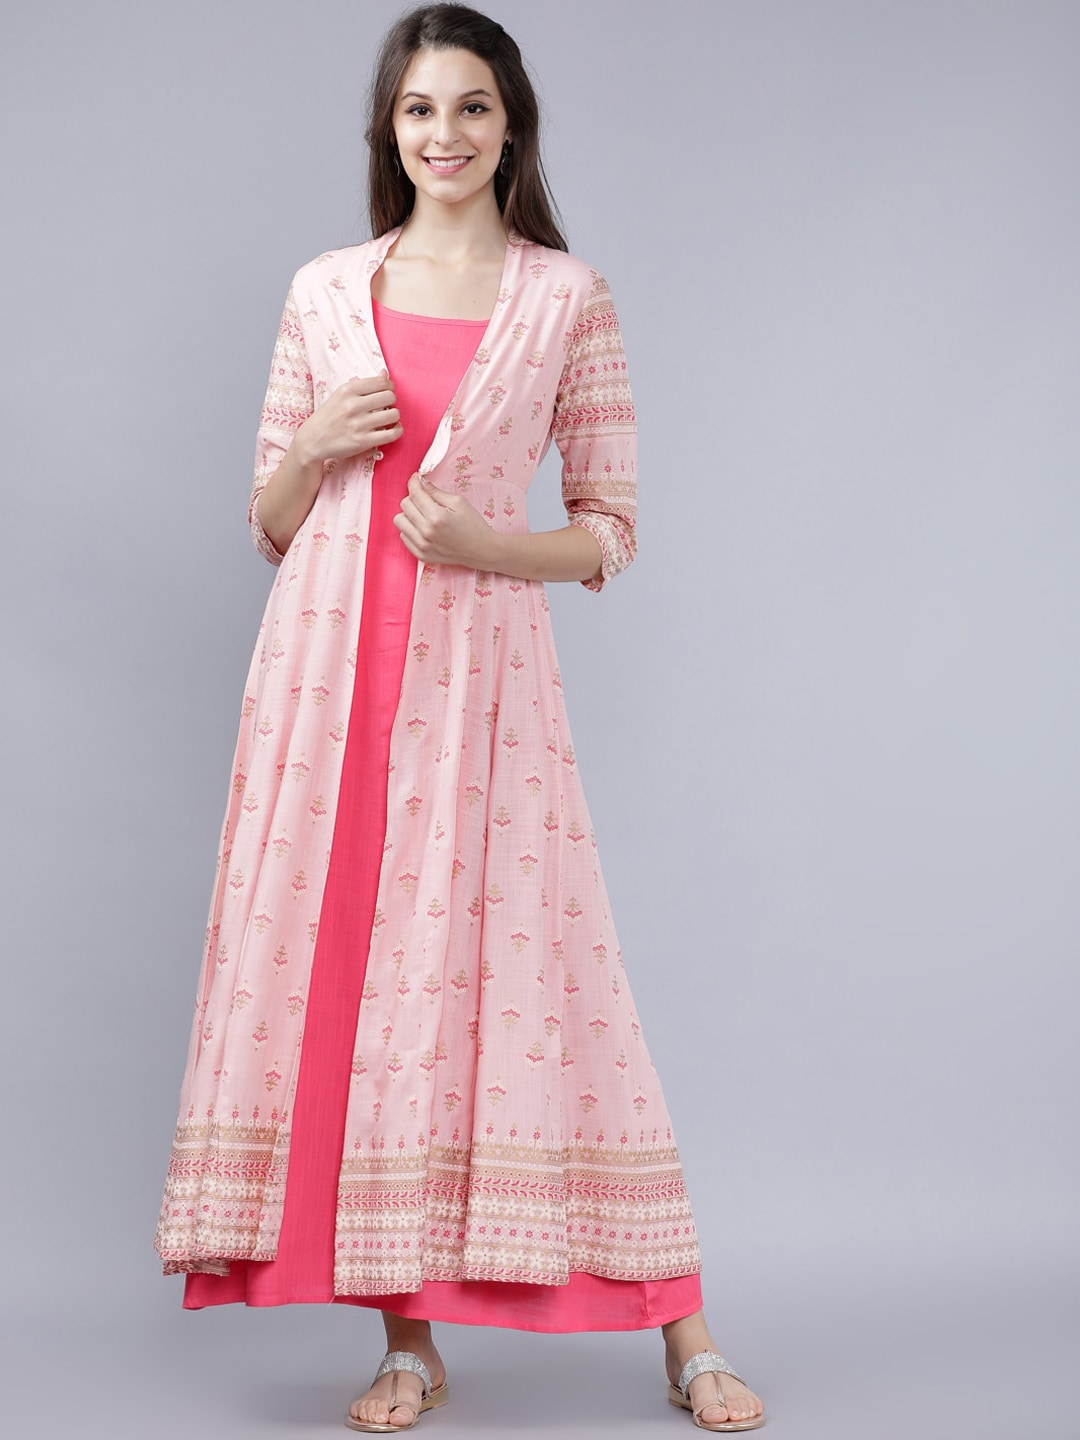 Vishudh Women Pink Floral Print Maxi Dress with Shrug Price in India